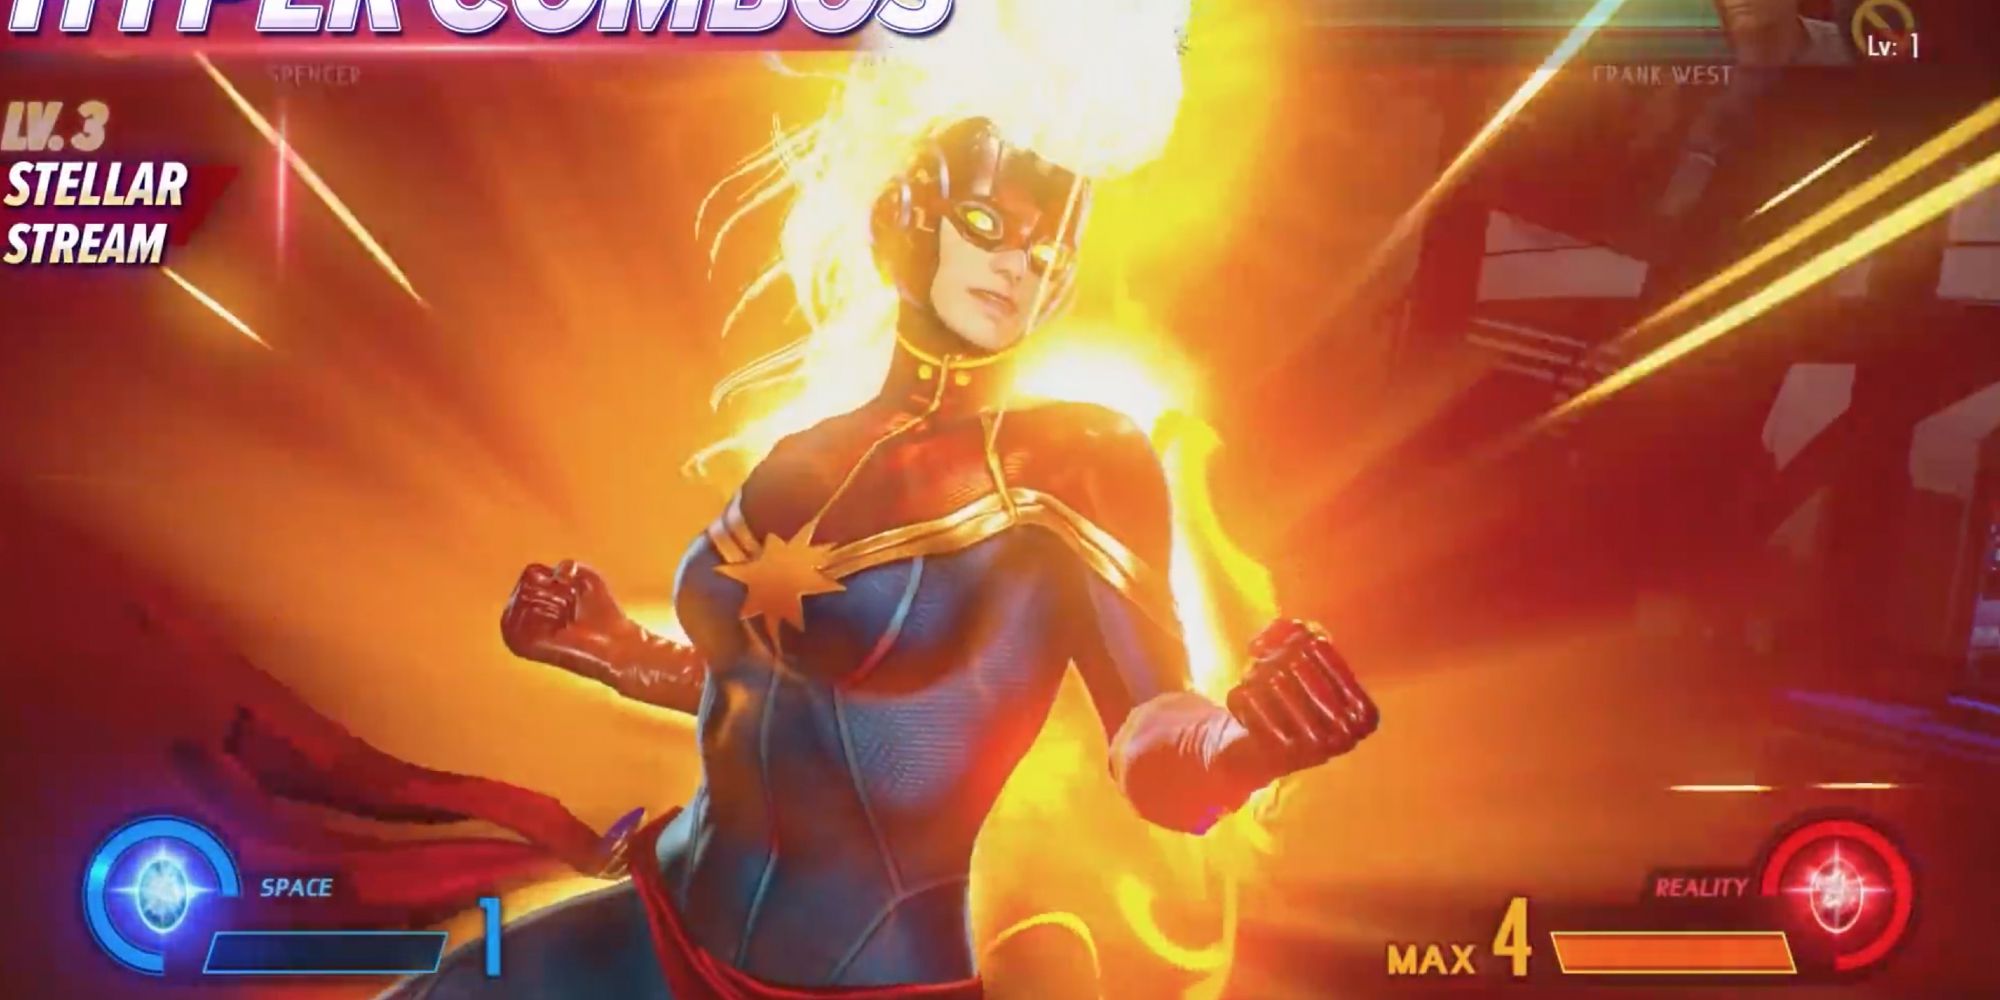 Iconic Fighting Stances in Video Games - Captain Marvel - Player begins to strike enemy with a combo hit